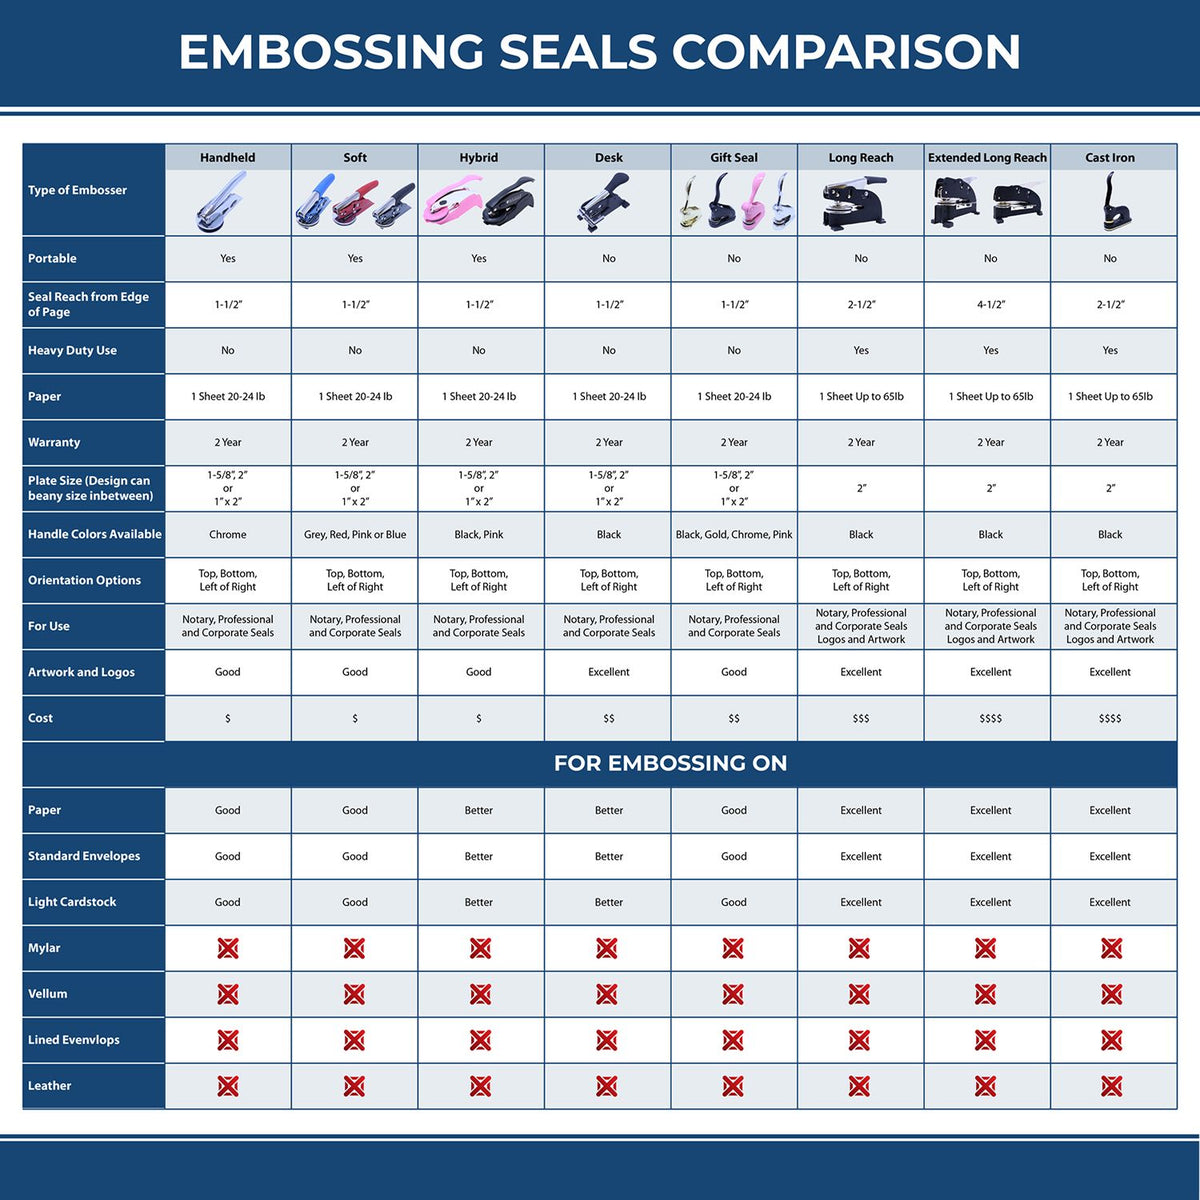 A comparison chart for the different types of mount models available for the Hybrid South Carolina Engineer Seal